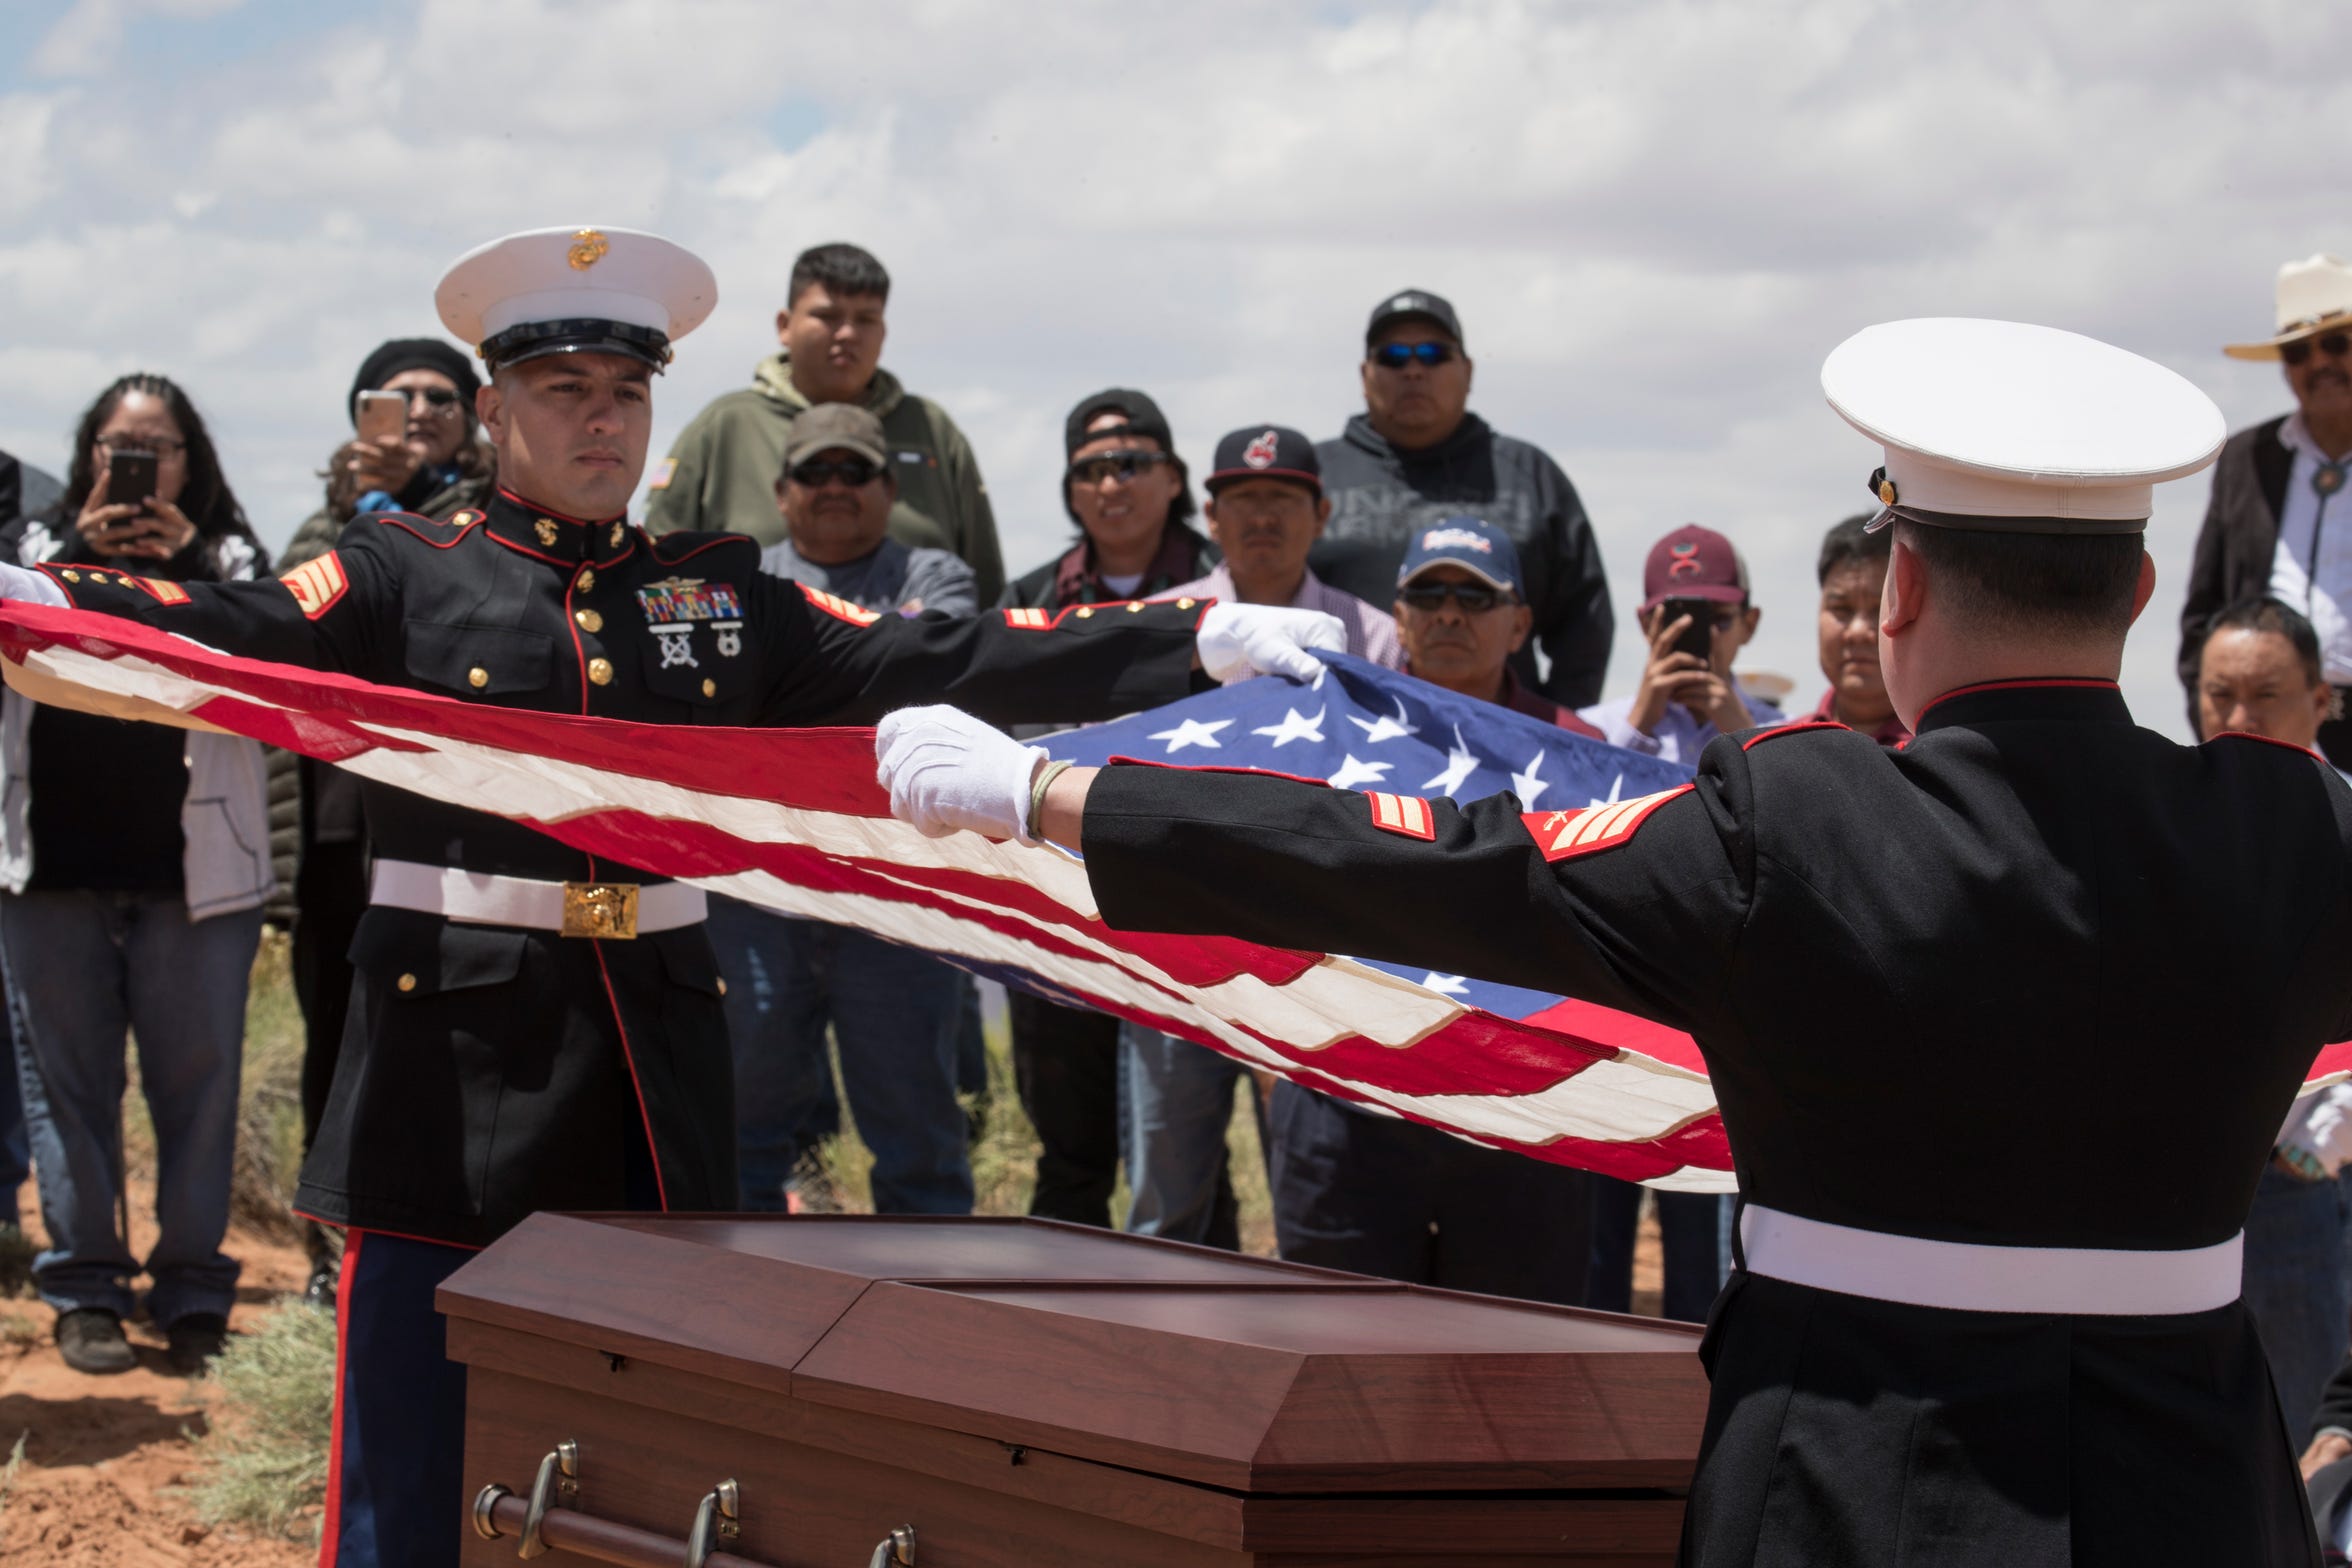 The flag was folded and presented to family during the interment of Navajo Code Talker Fleming Begaye Sr. on May 17, 2019, at the family plot in Salt Water Canyon, Ariz.